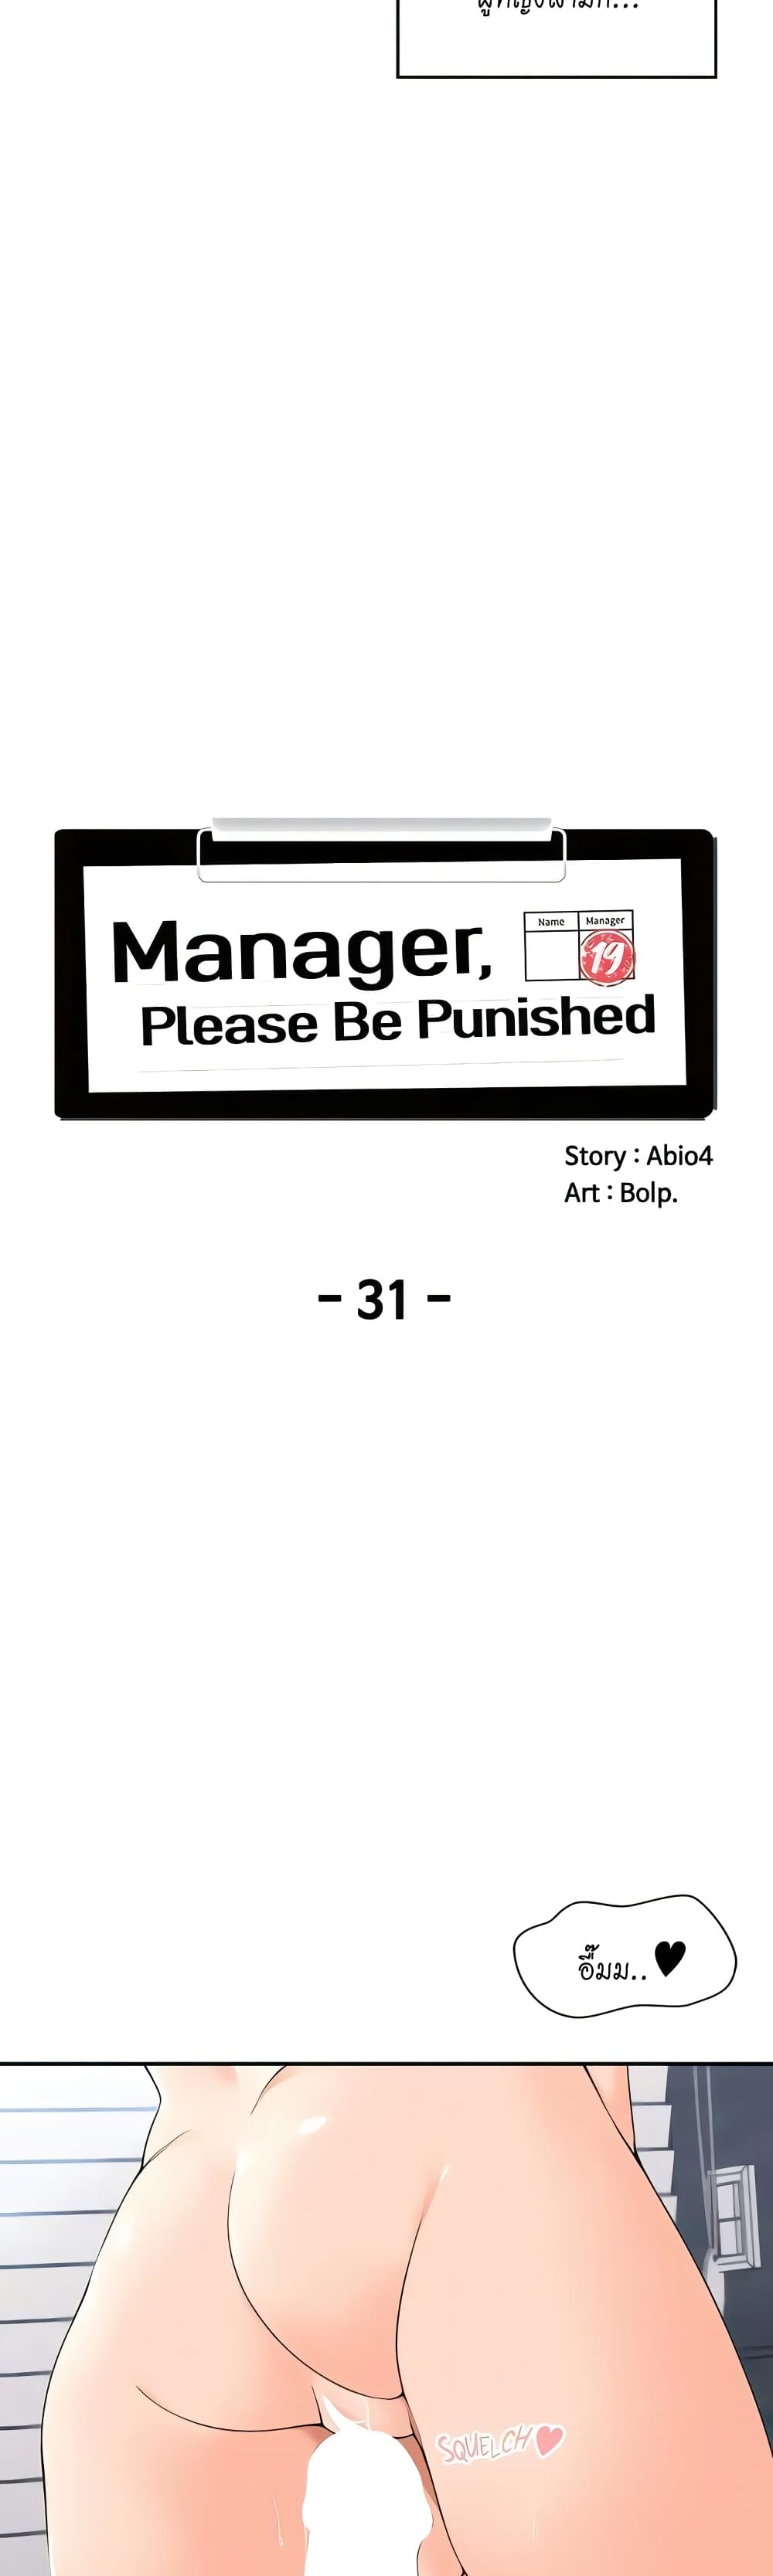 Manager, Please Scold Me 31-31